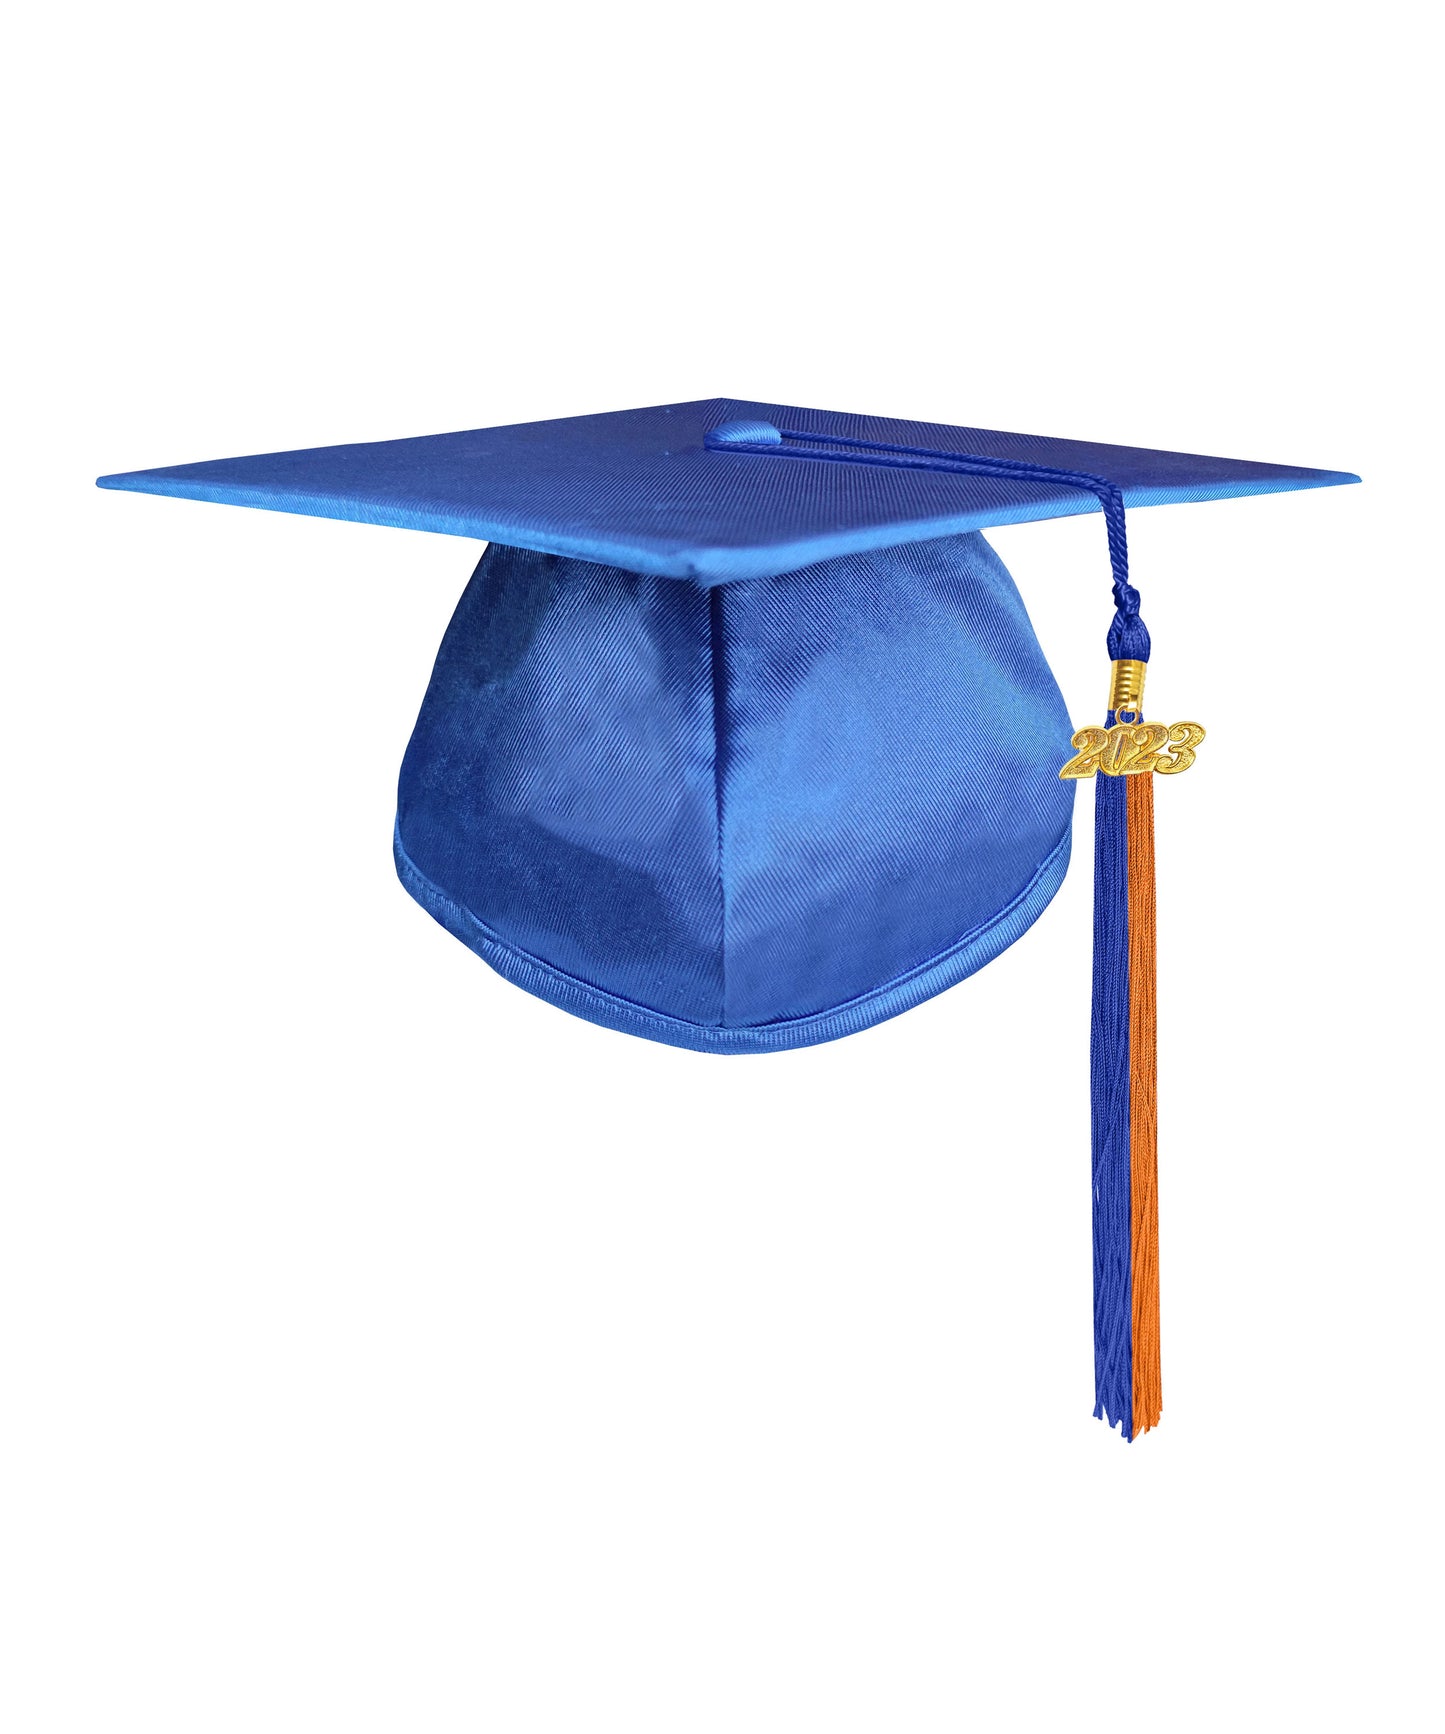 Shiny Graduation Cap with Colourful Tassel Charm 2023|2024 for Middle & High School | Bachelor & Master Degree-CA graduation